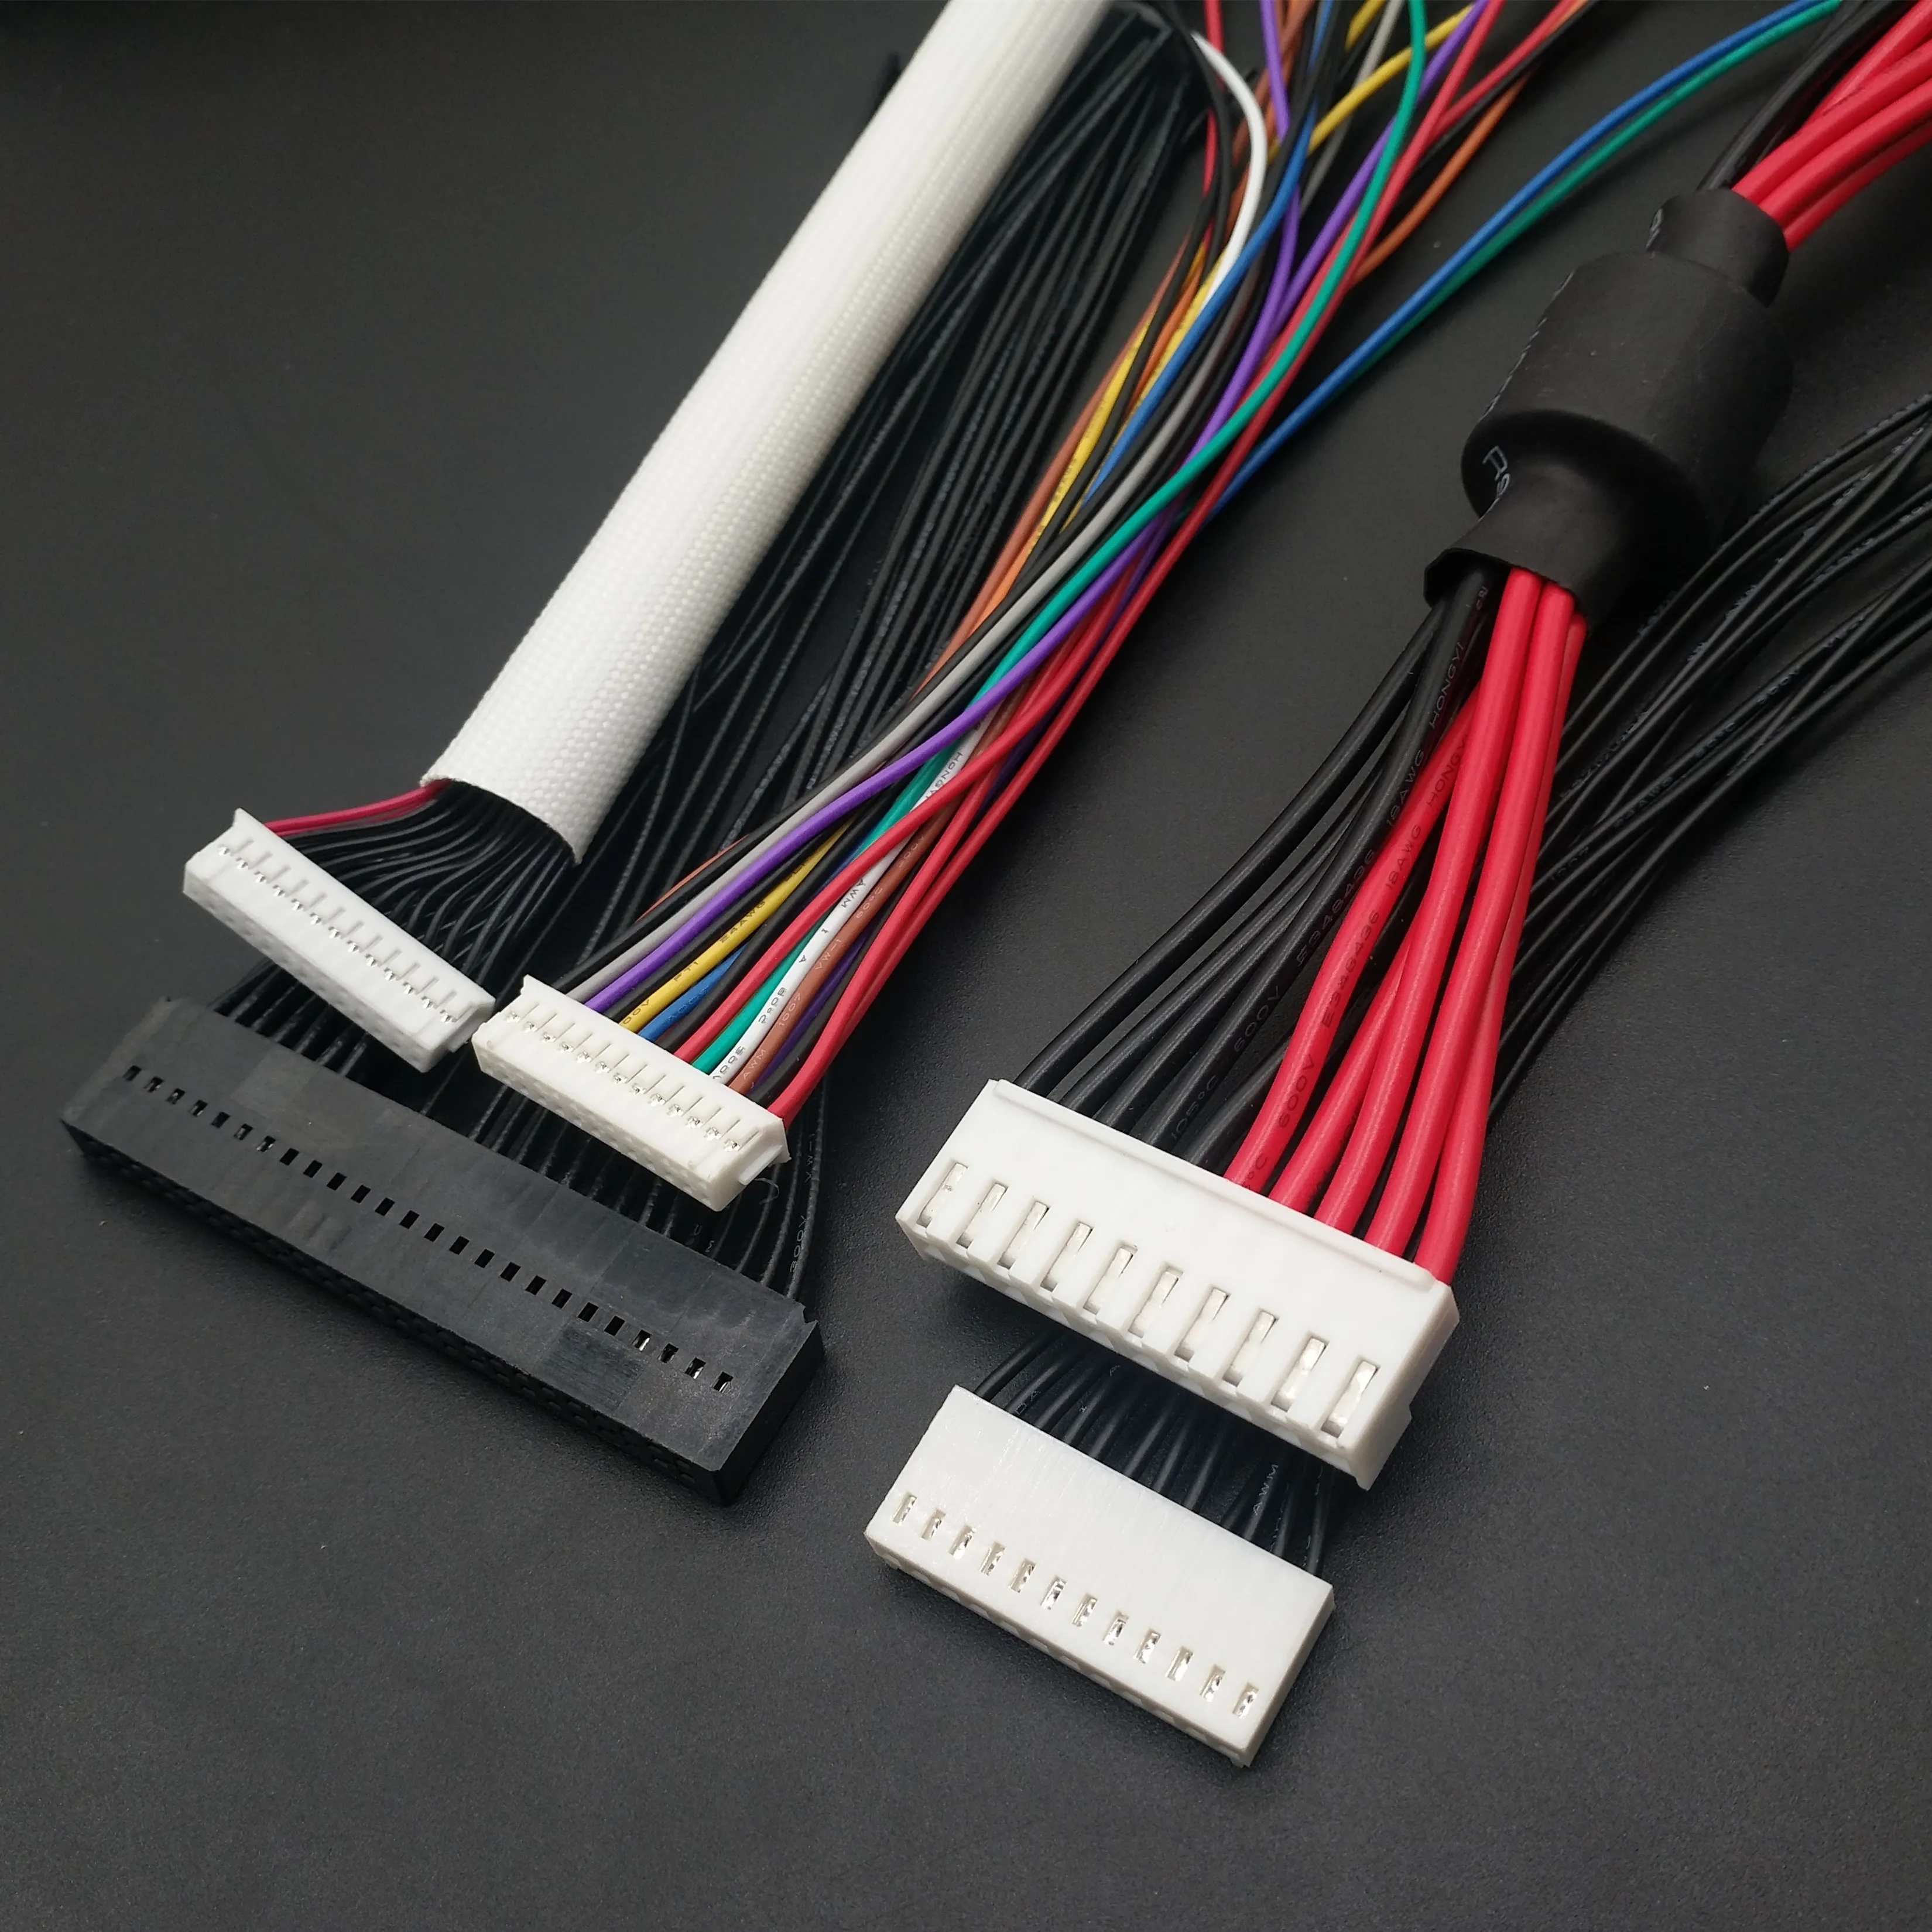 Eco friendly dialect Relationship 6pin 4 Pin Molex 2.54 Mm Pitch 90142 Connector Cable Wire Harness - Buy  Cable Wire Harness,C-grid 90142 Connector Cable Wire Harness,64 Pin Molex  2.54 Mm Pitch Cable Wire Harness Product on Alibaba.com